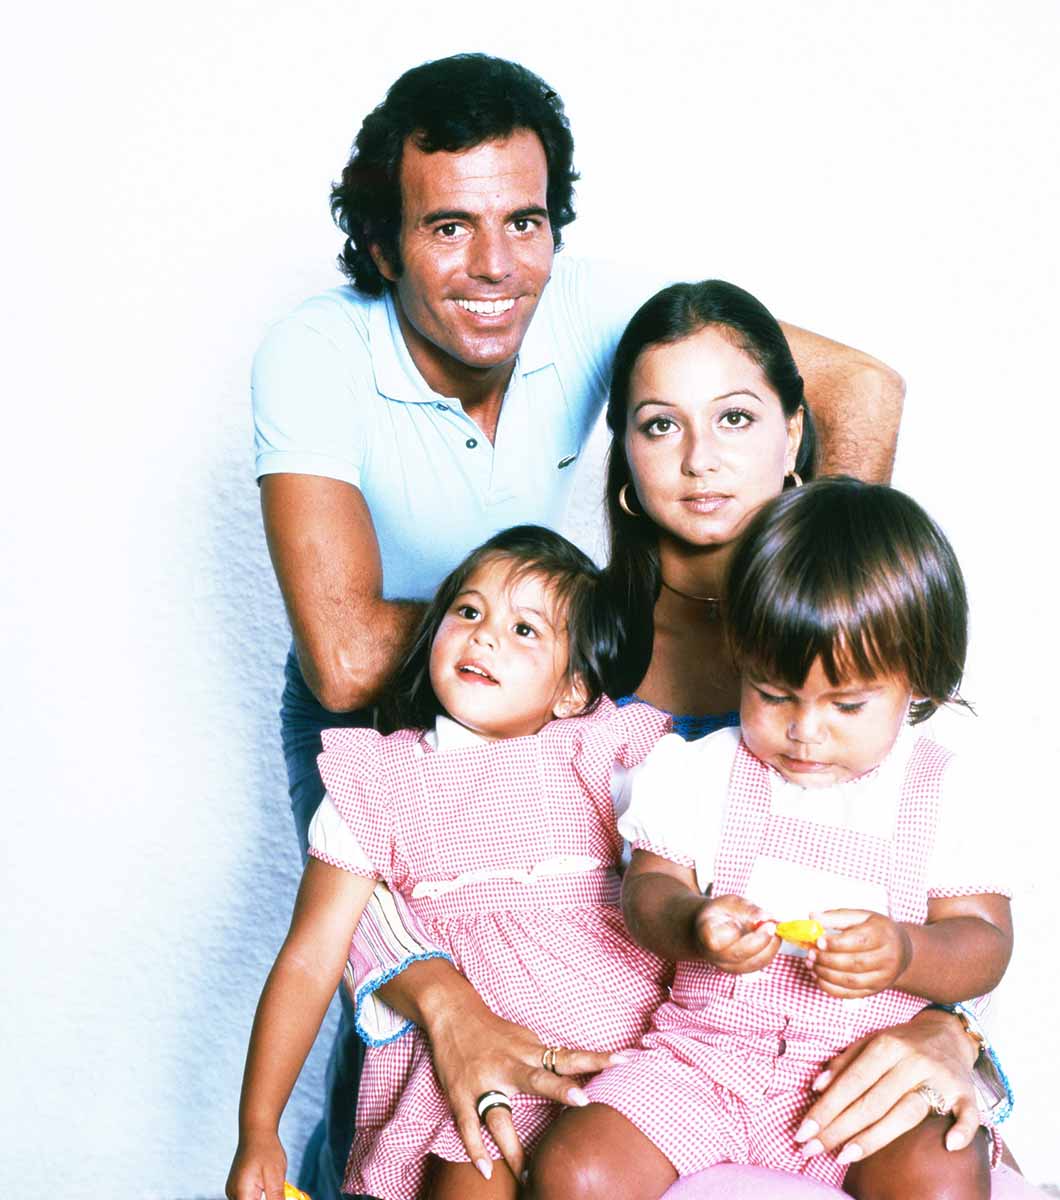 Portrait of singer Julio Iglesias with his wife Isabel Preysler and the children Chabeli and Julio Jose at his home in Cadiz, Spain 1974.